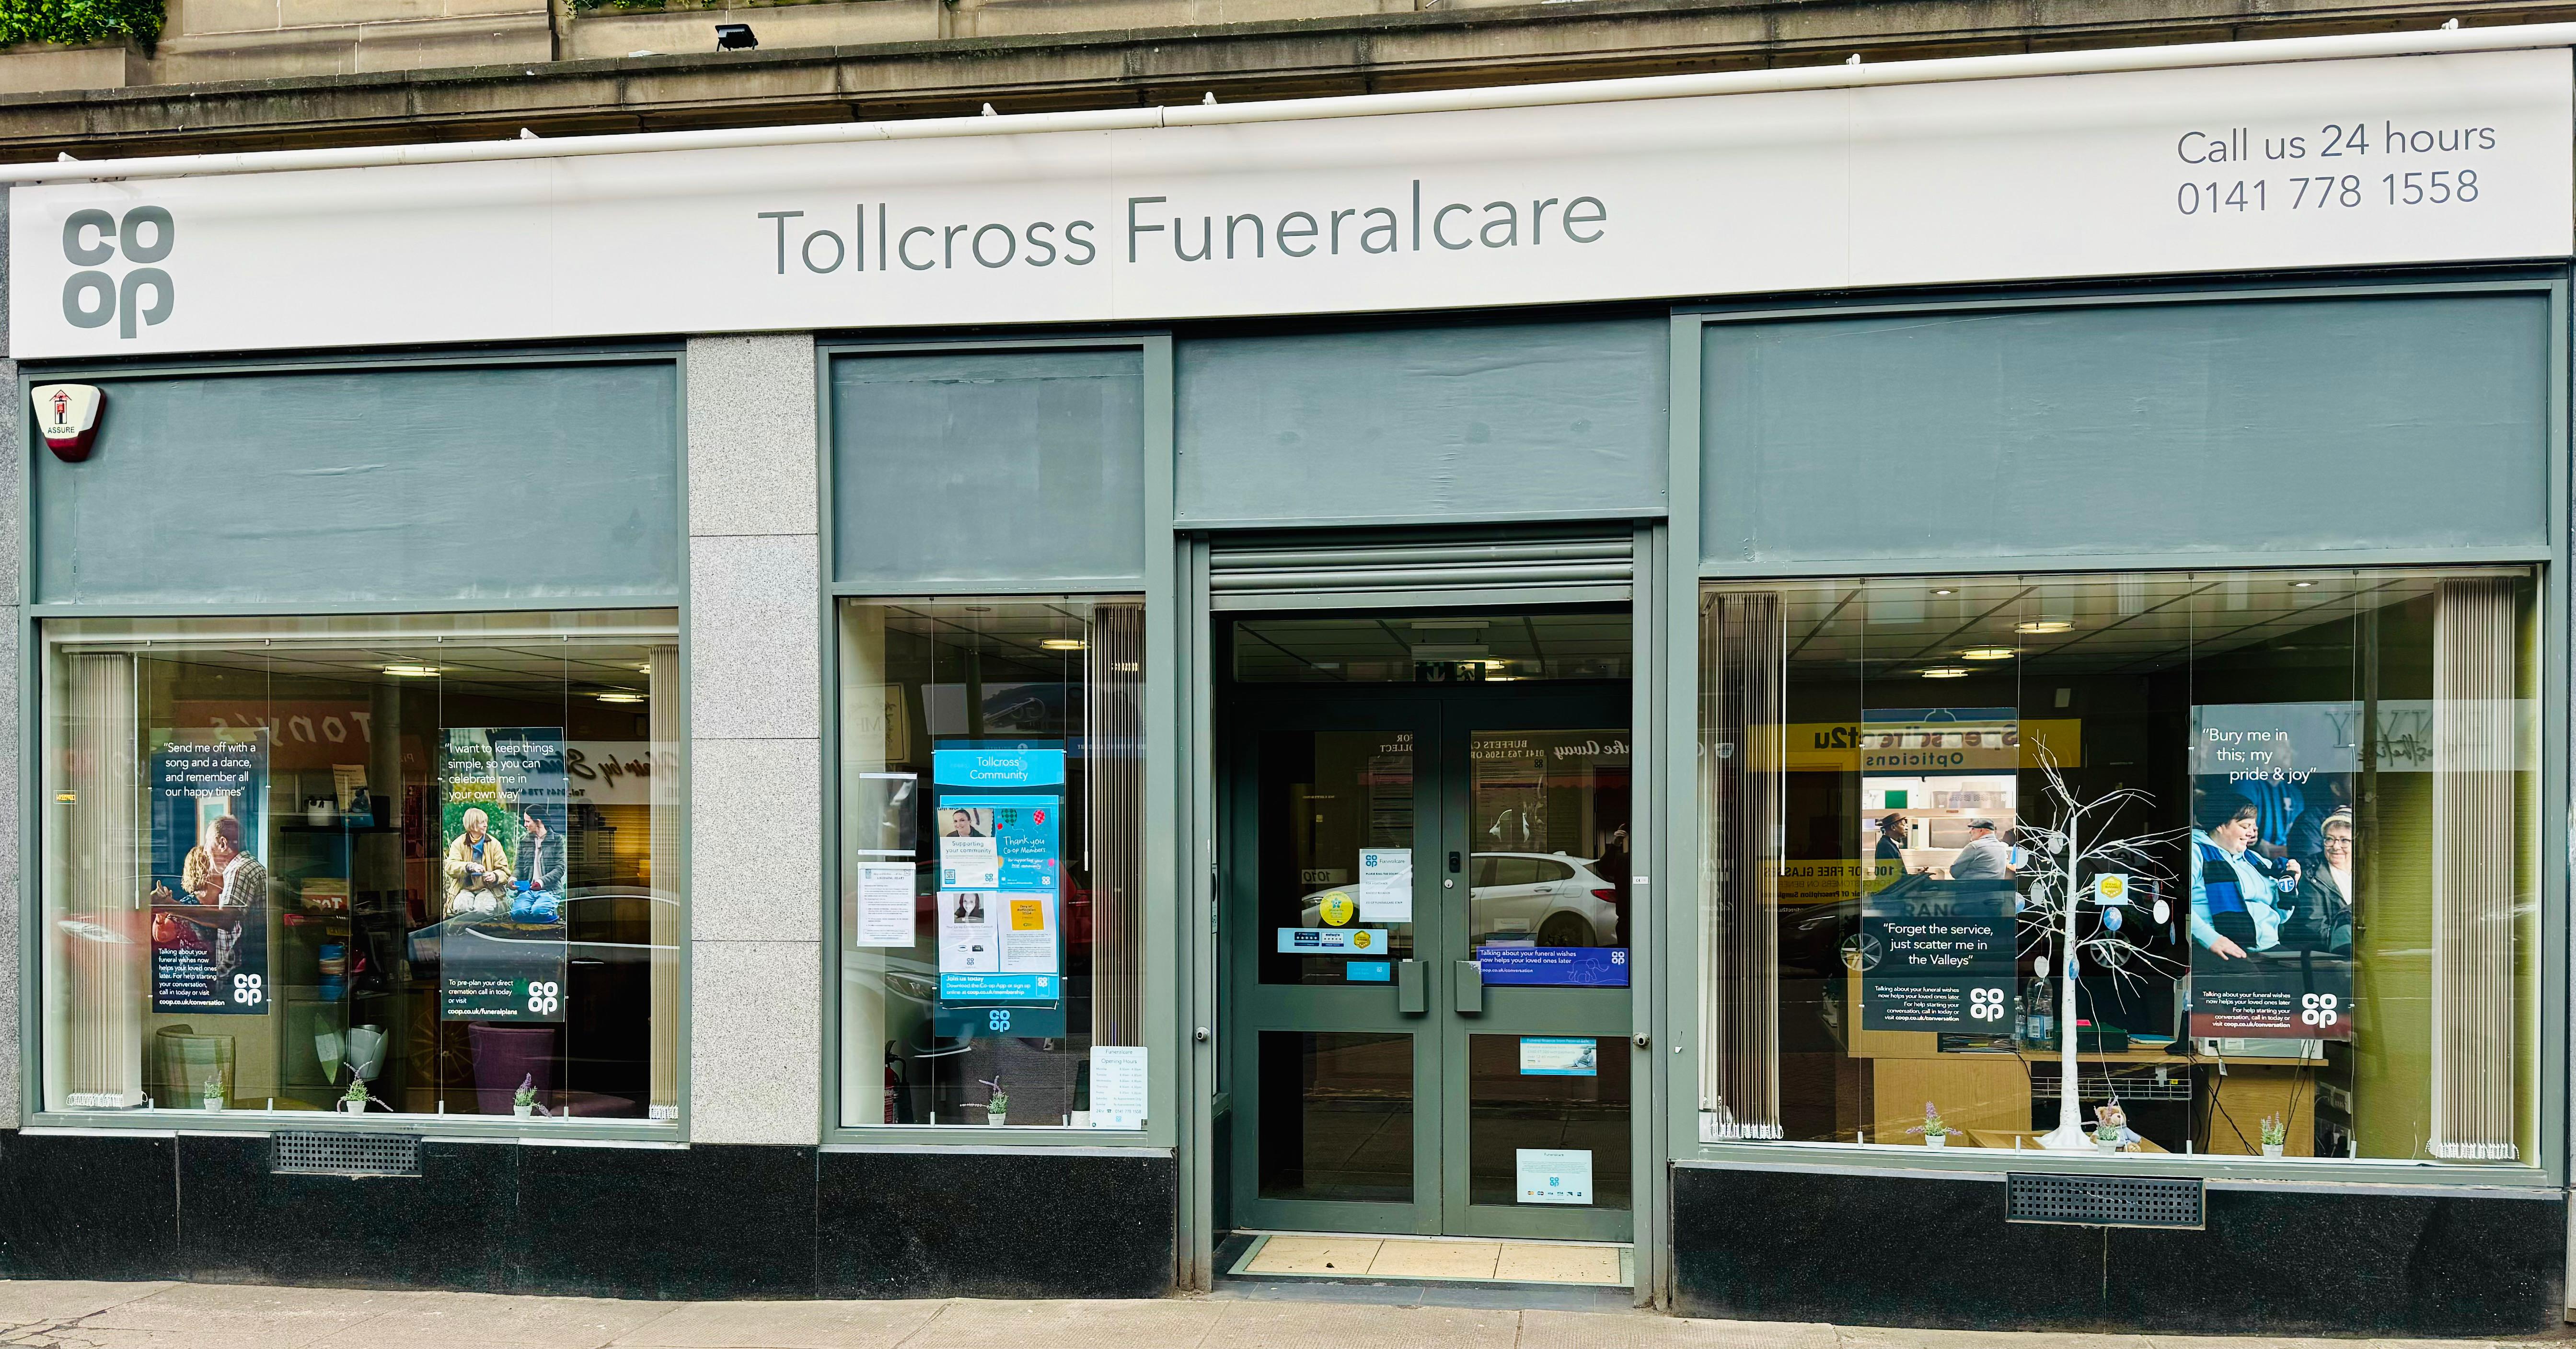 Images Tollcross Funeralcare